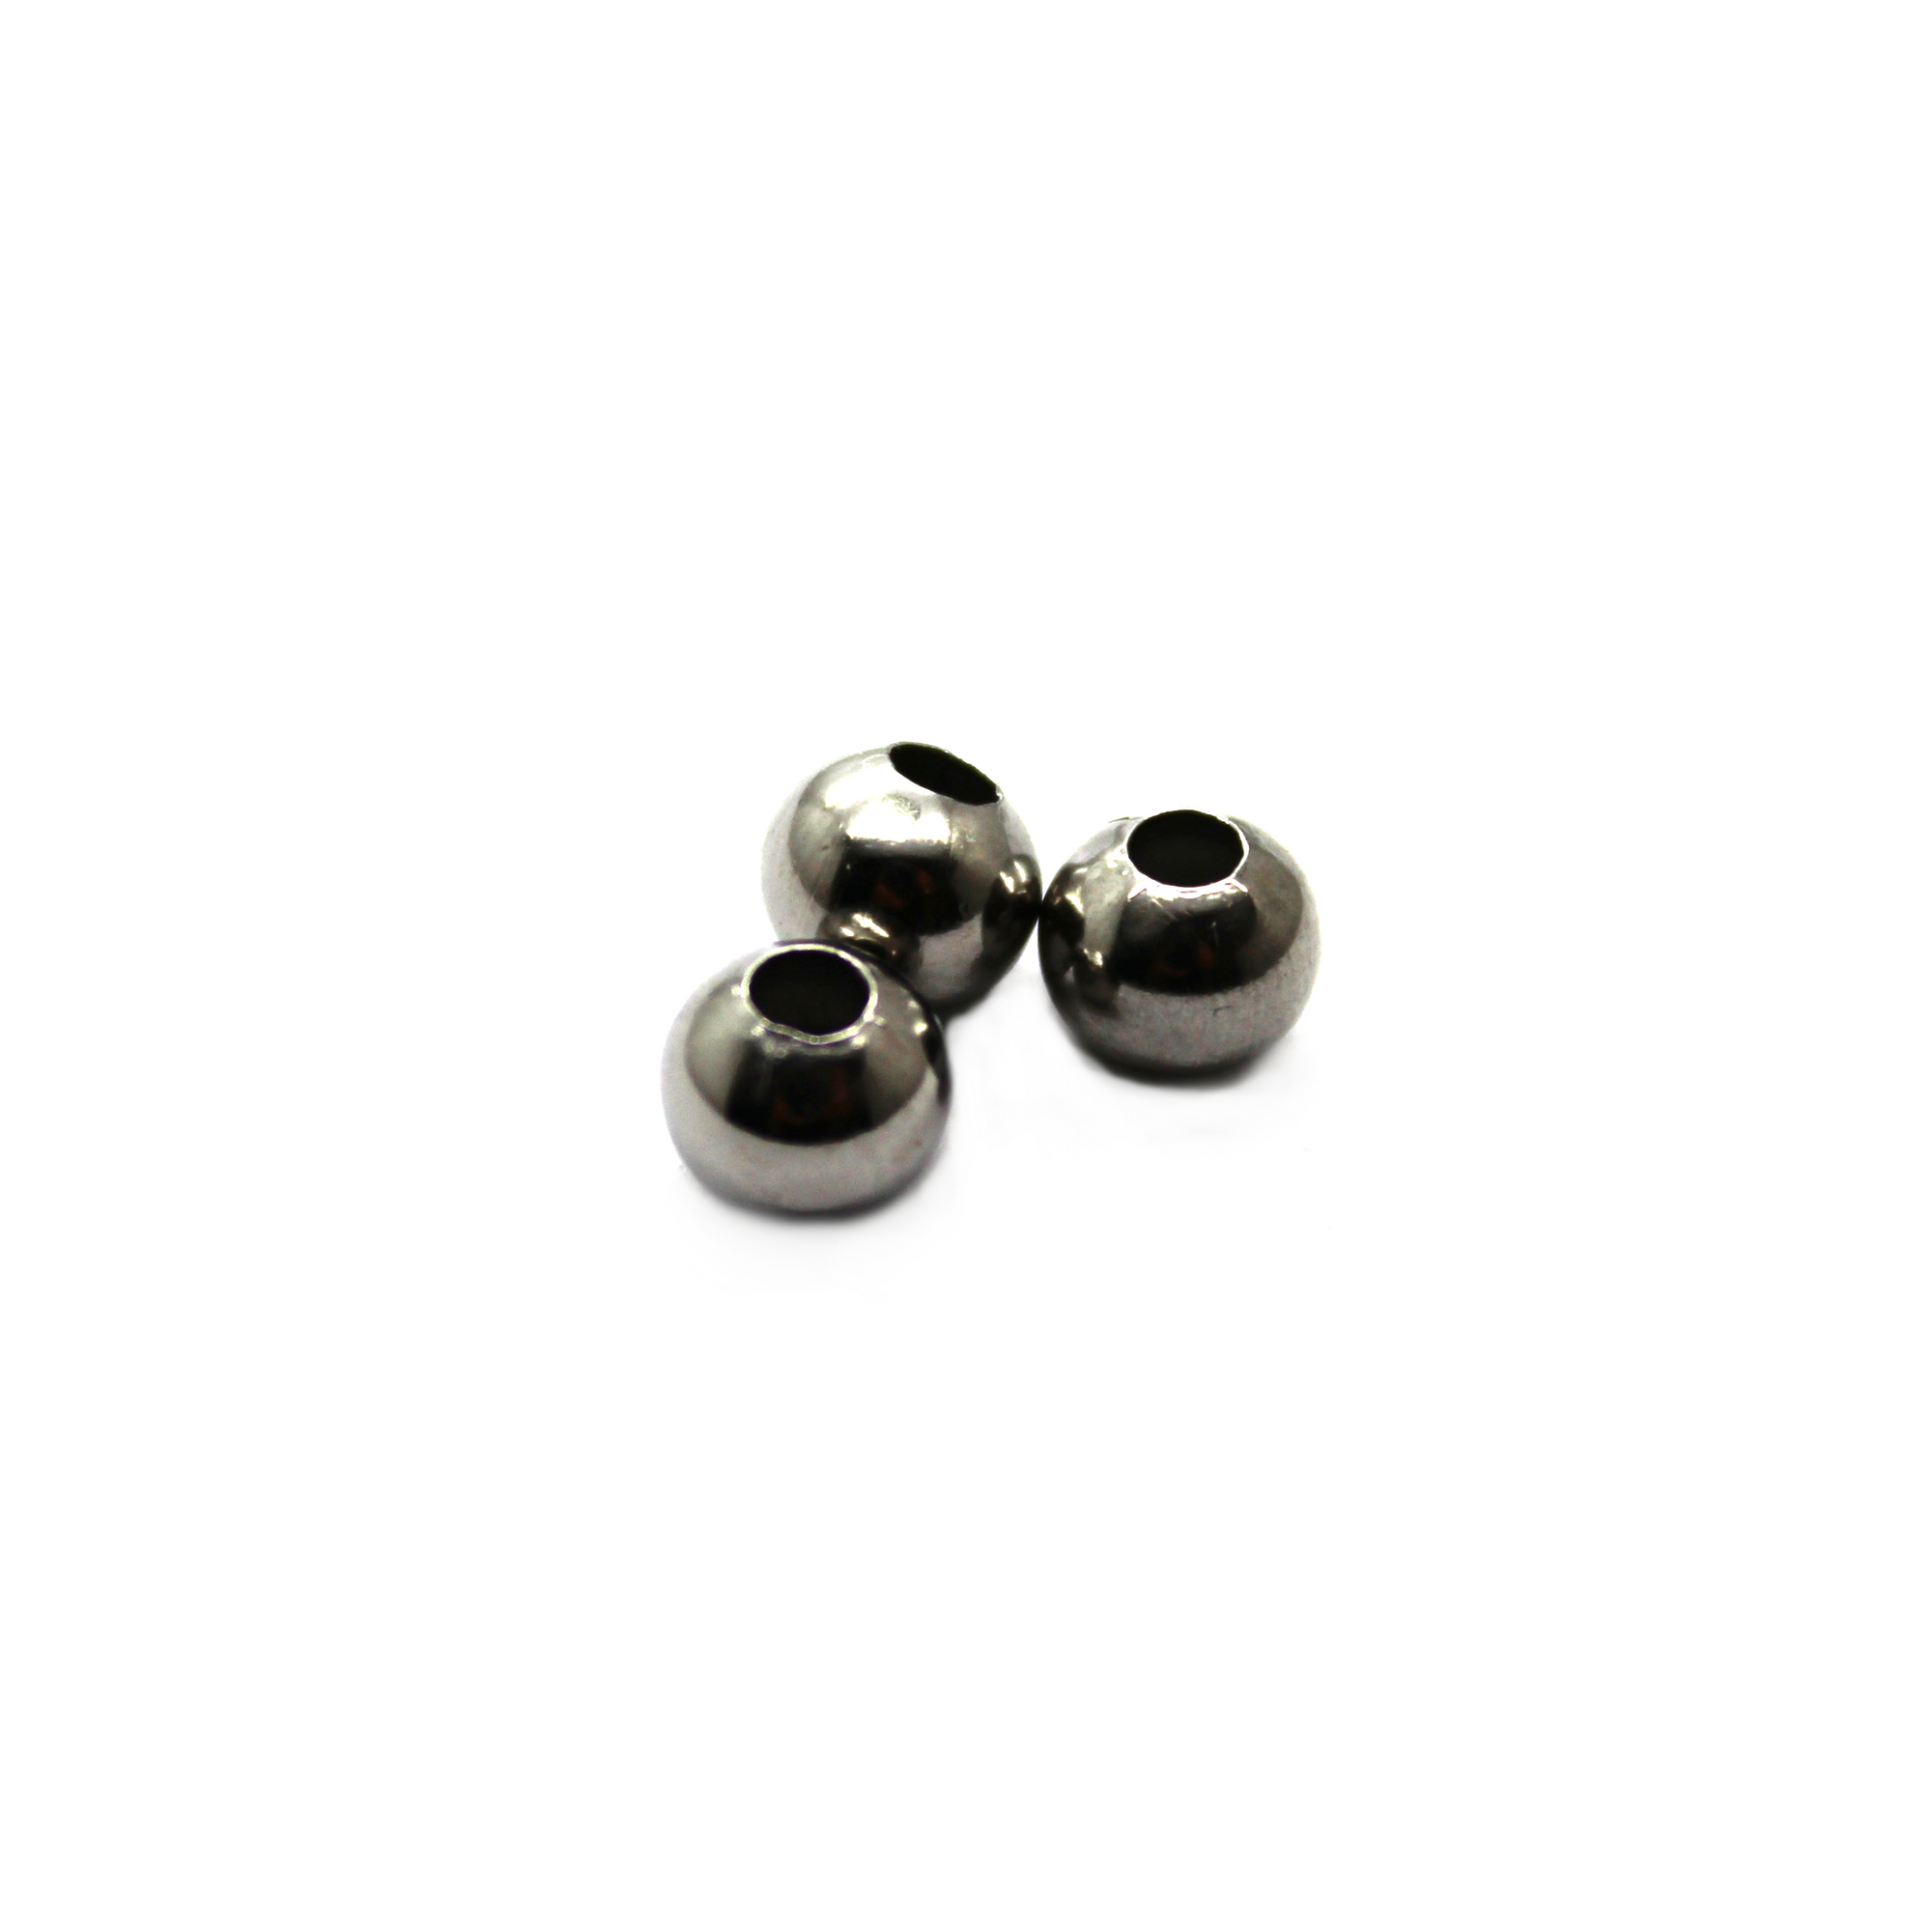 Plain Round Spacer, Stainless Steel, 4.2mm x 4.8mm x 1.5mm, 20 pcs/bag